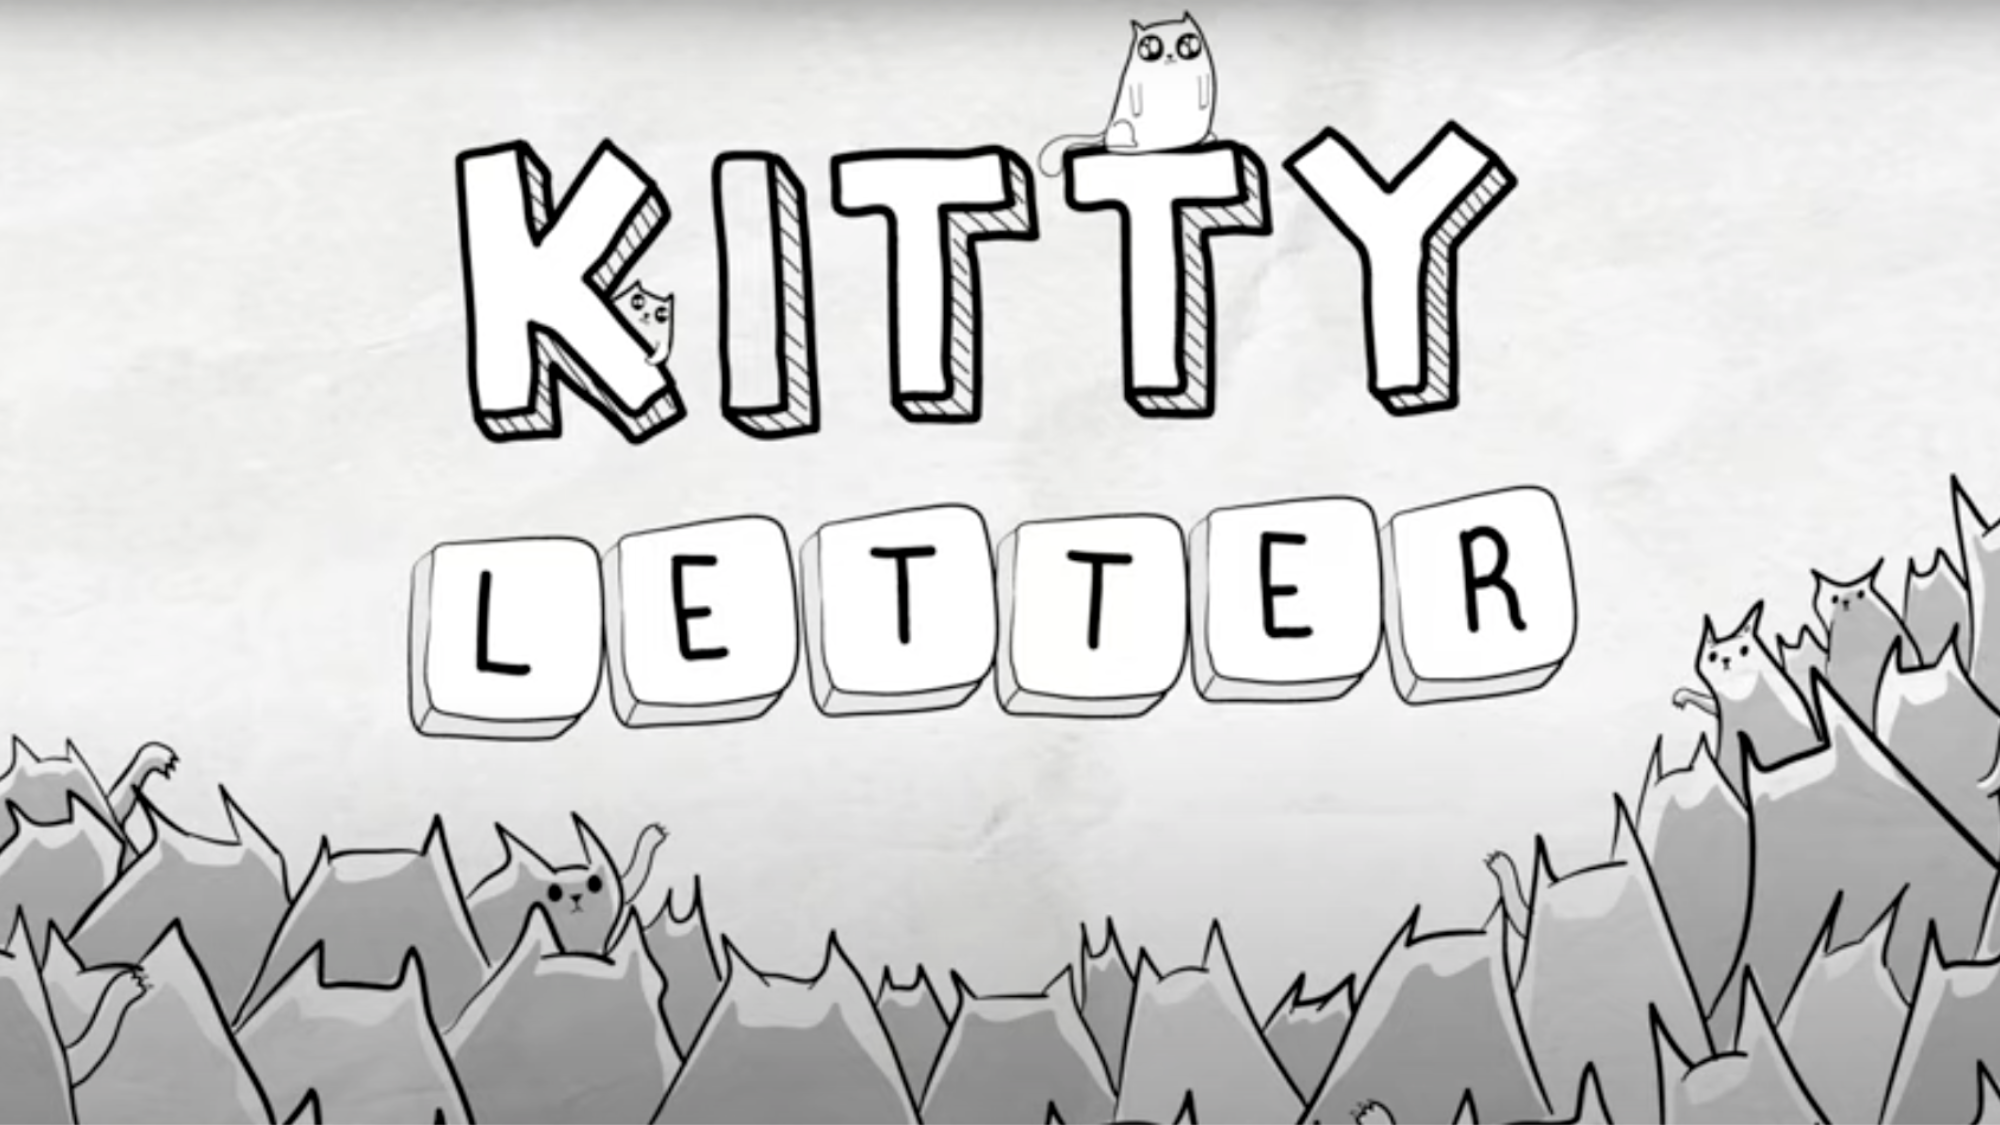 Kitty Letter: The Game Where Words and Cats Collide